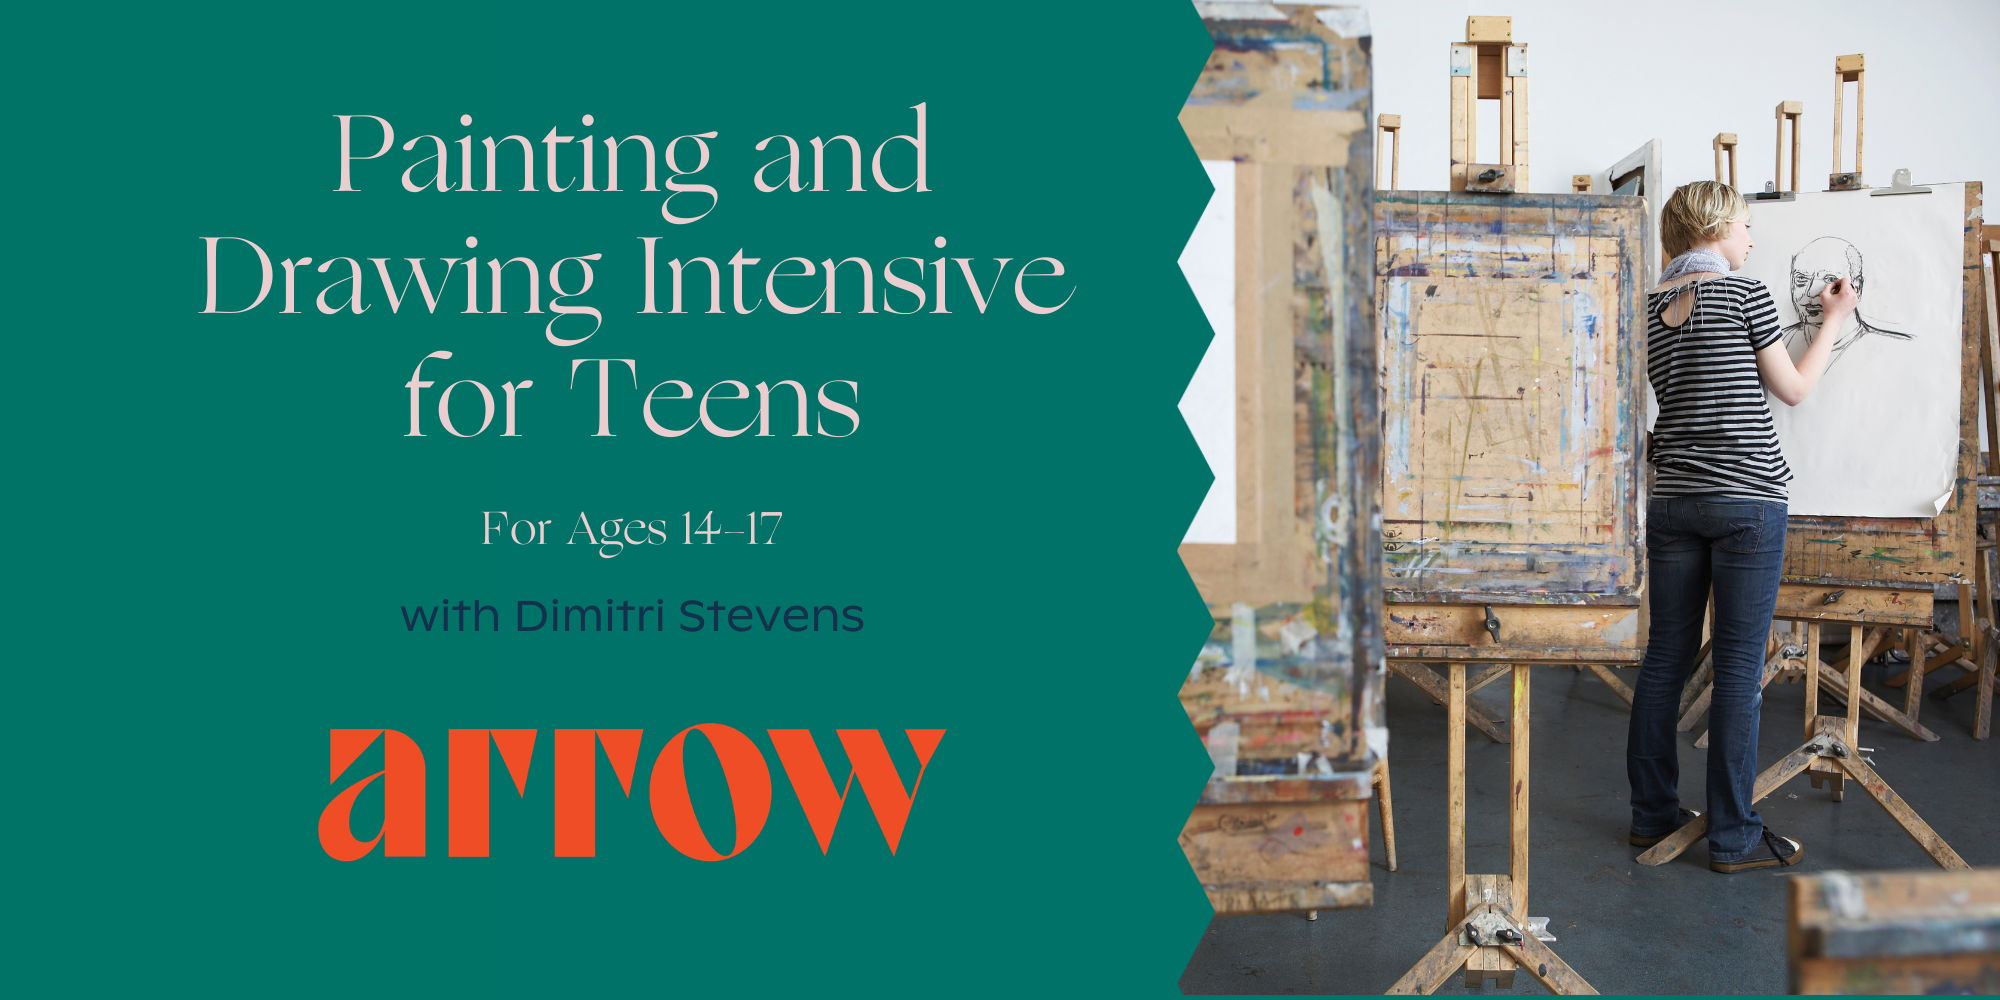 Drawing and Painting Intensive for Teens promotional image